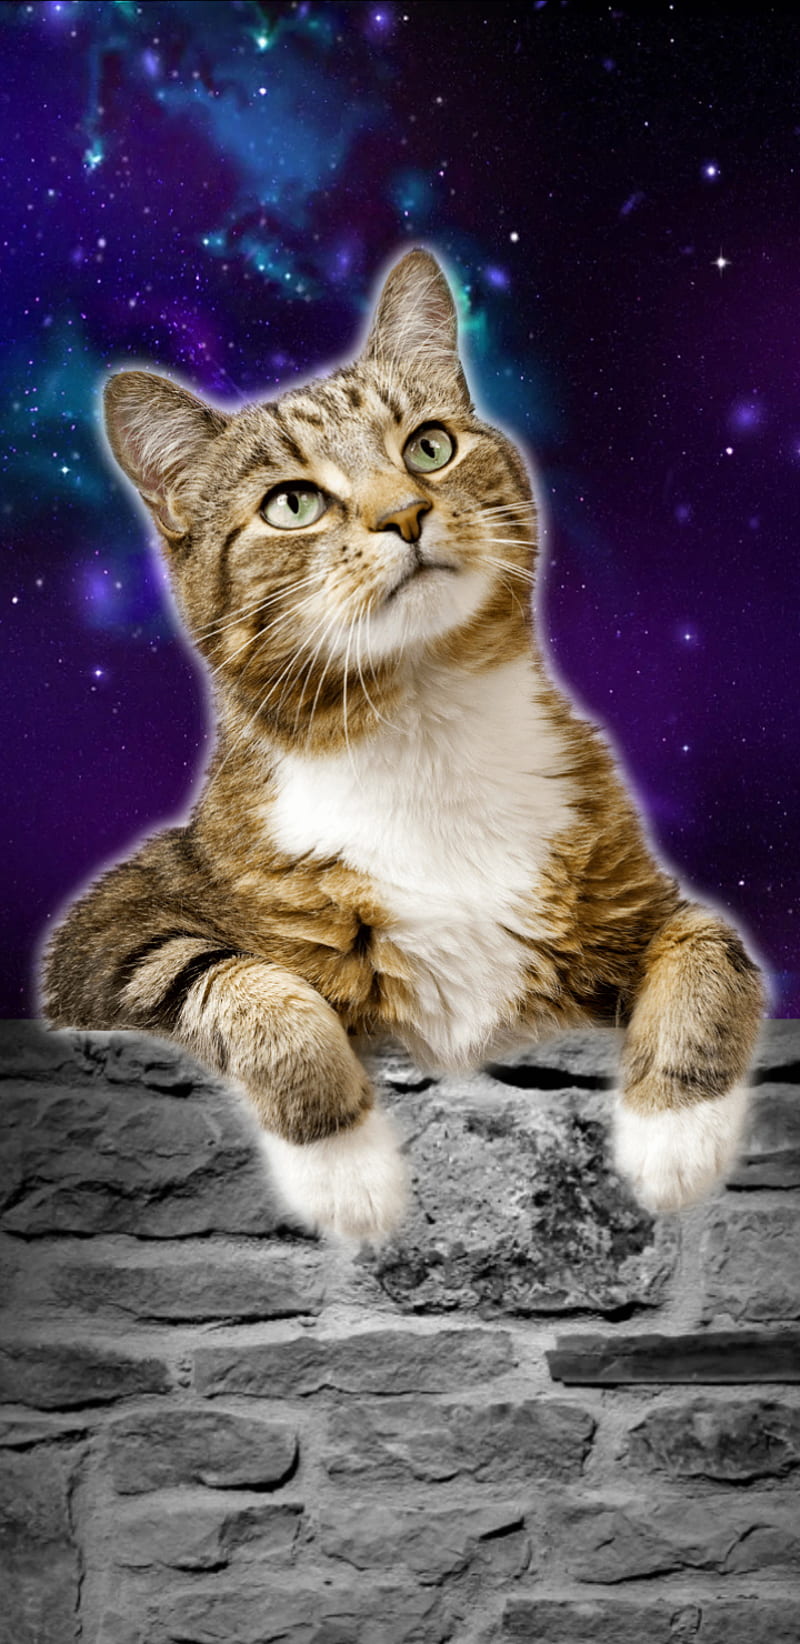 Page 4  Cat Galaxy Wallpaper Images  Free Download on Freepik